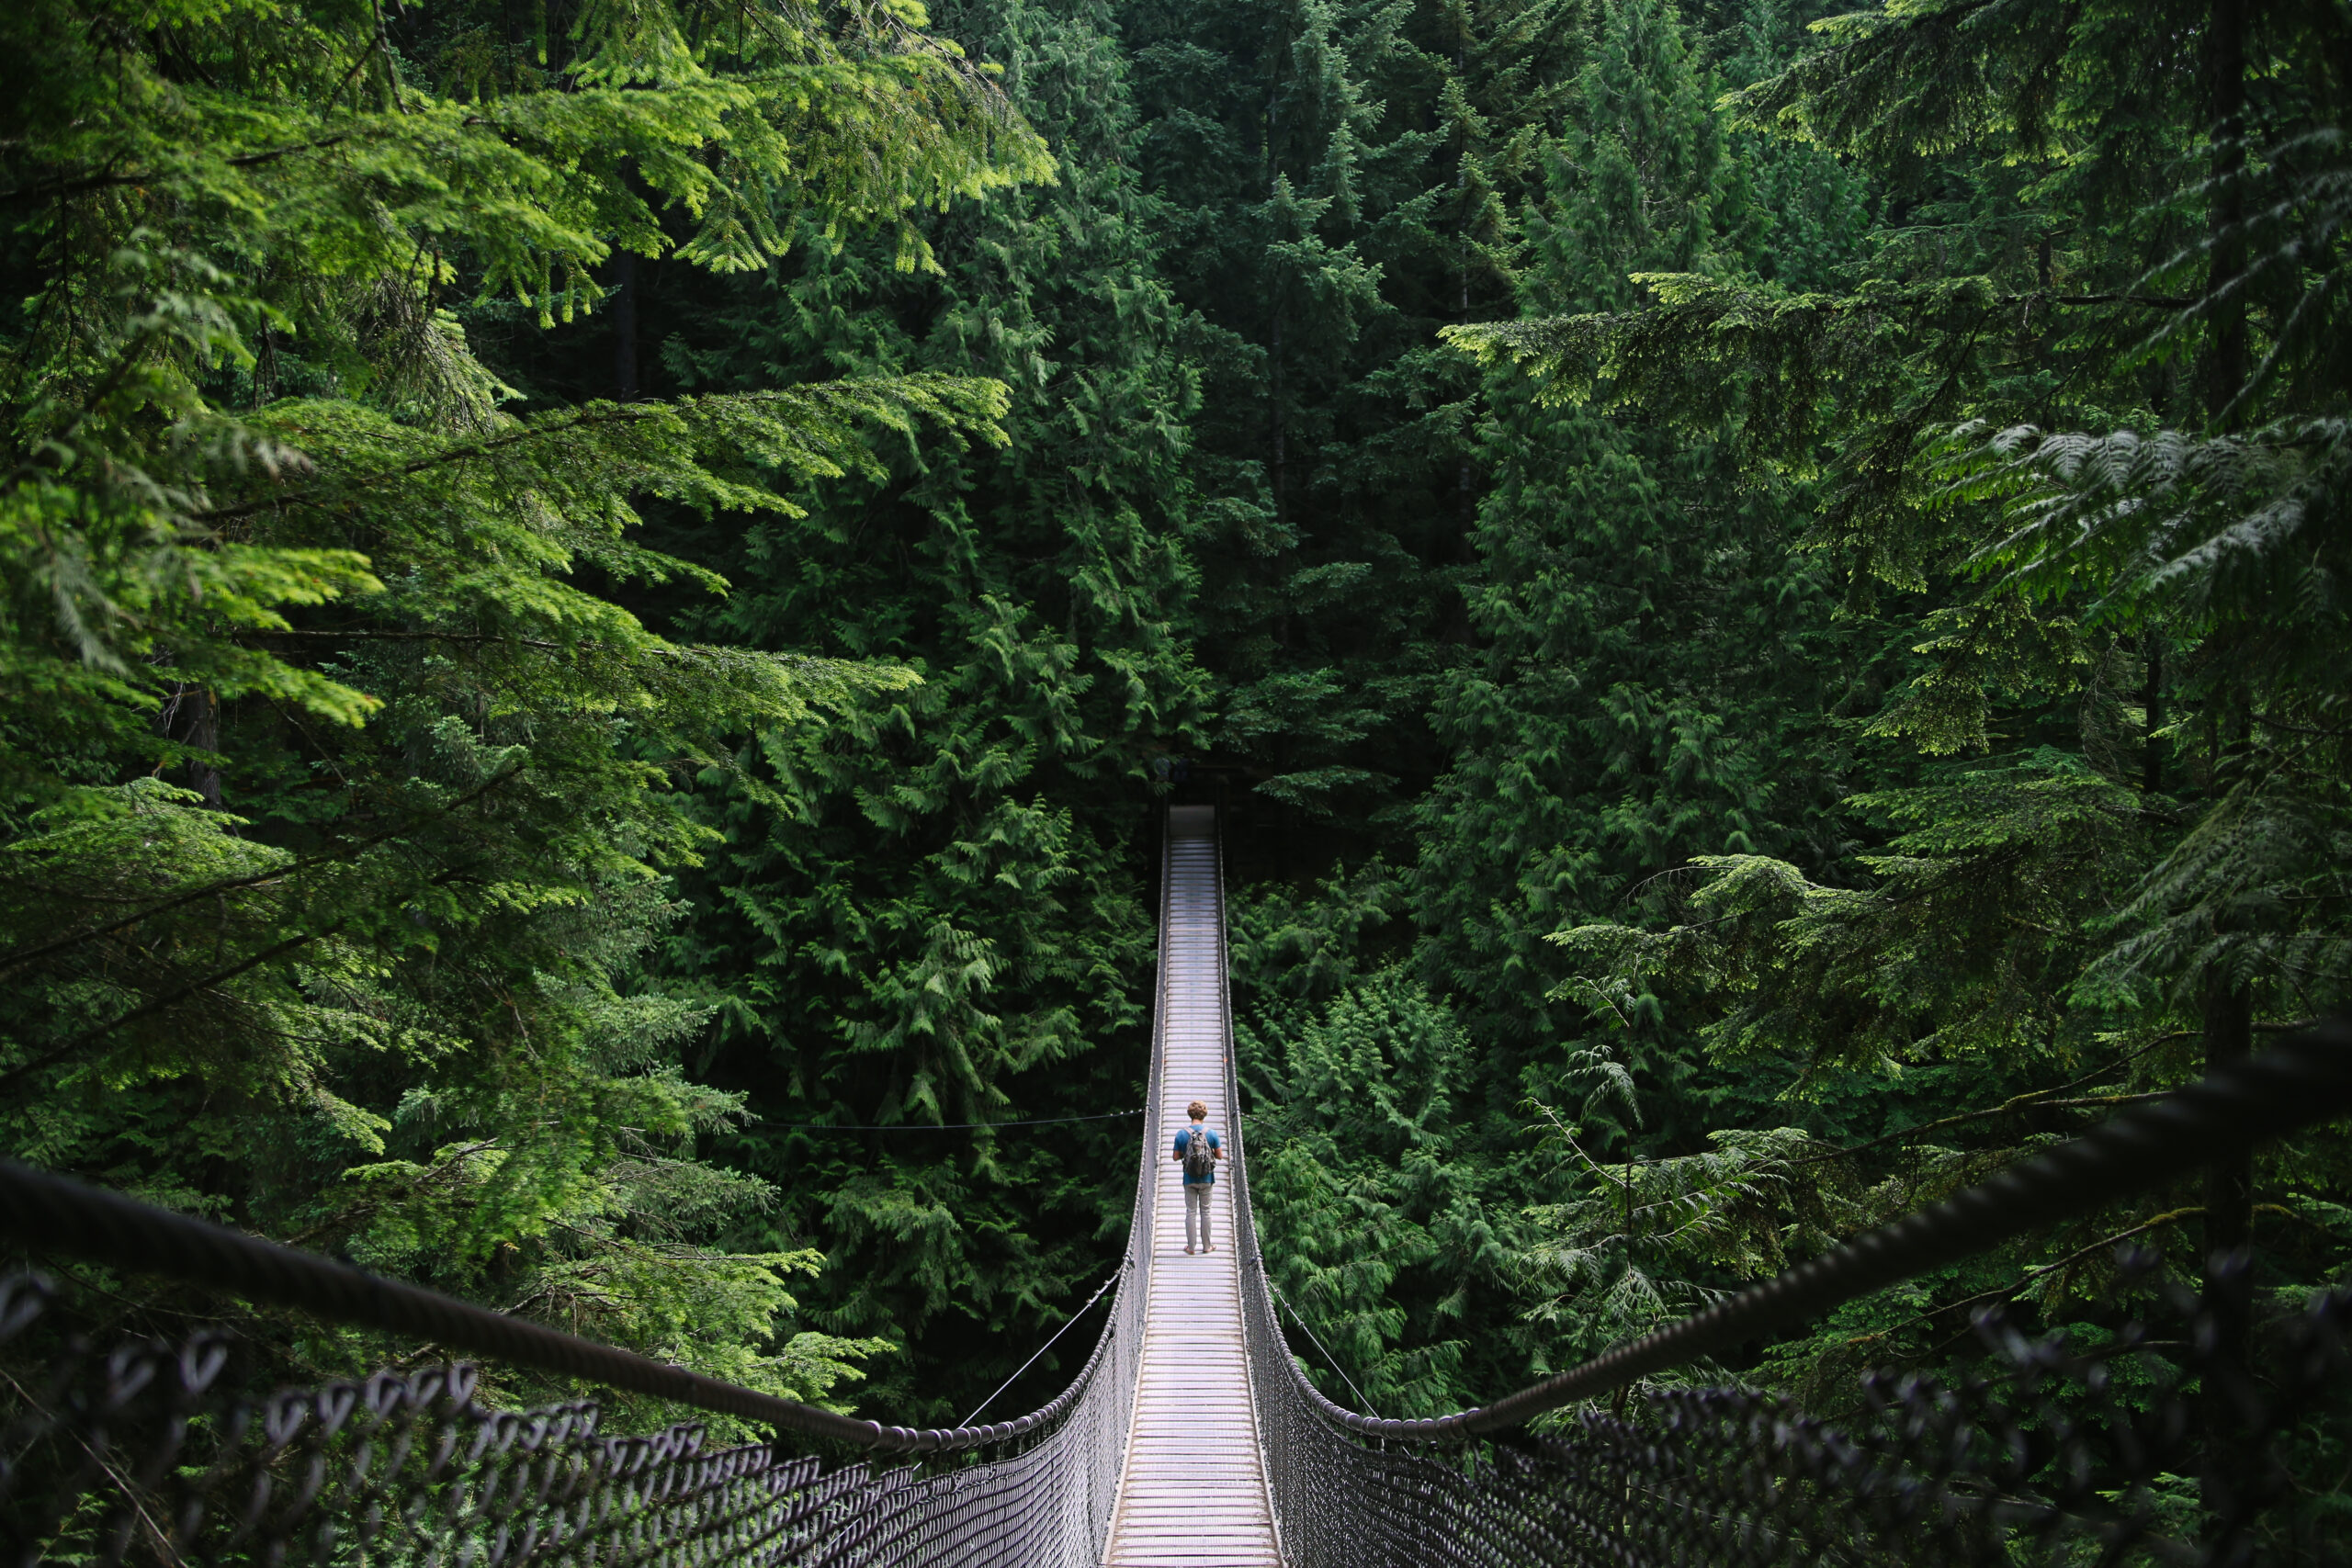 A young fit man exploring the wilderness; walking desolate suspension bridges, walking around a blue alpine lake, and driving on the open road.